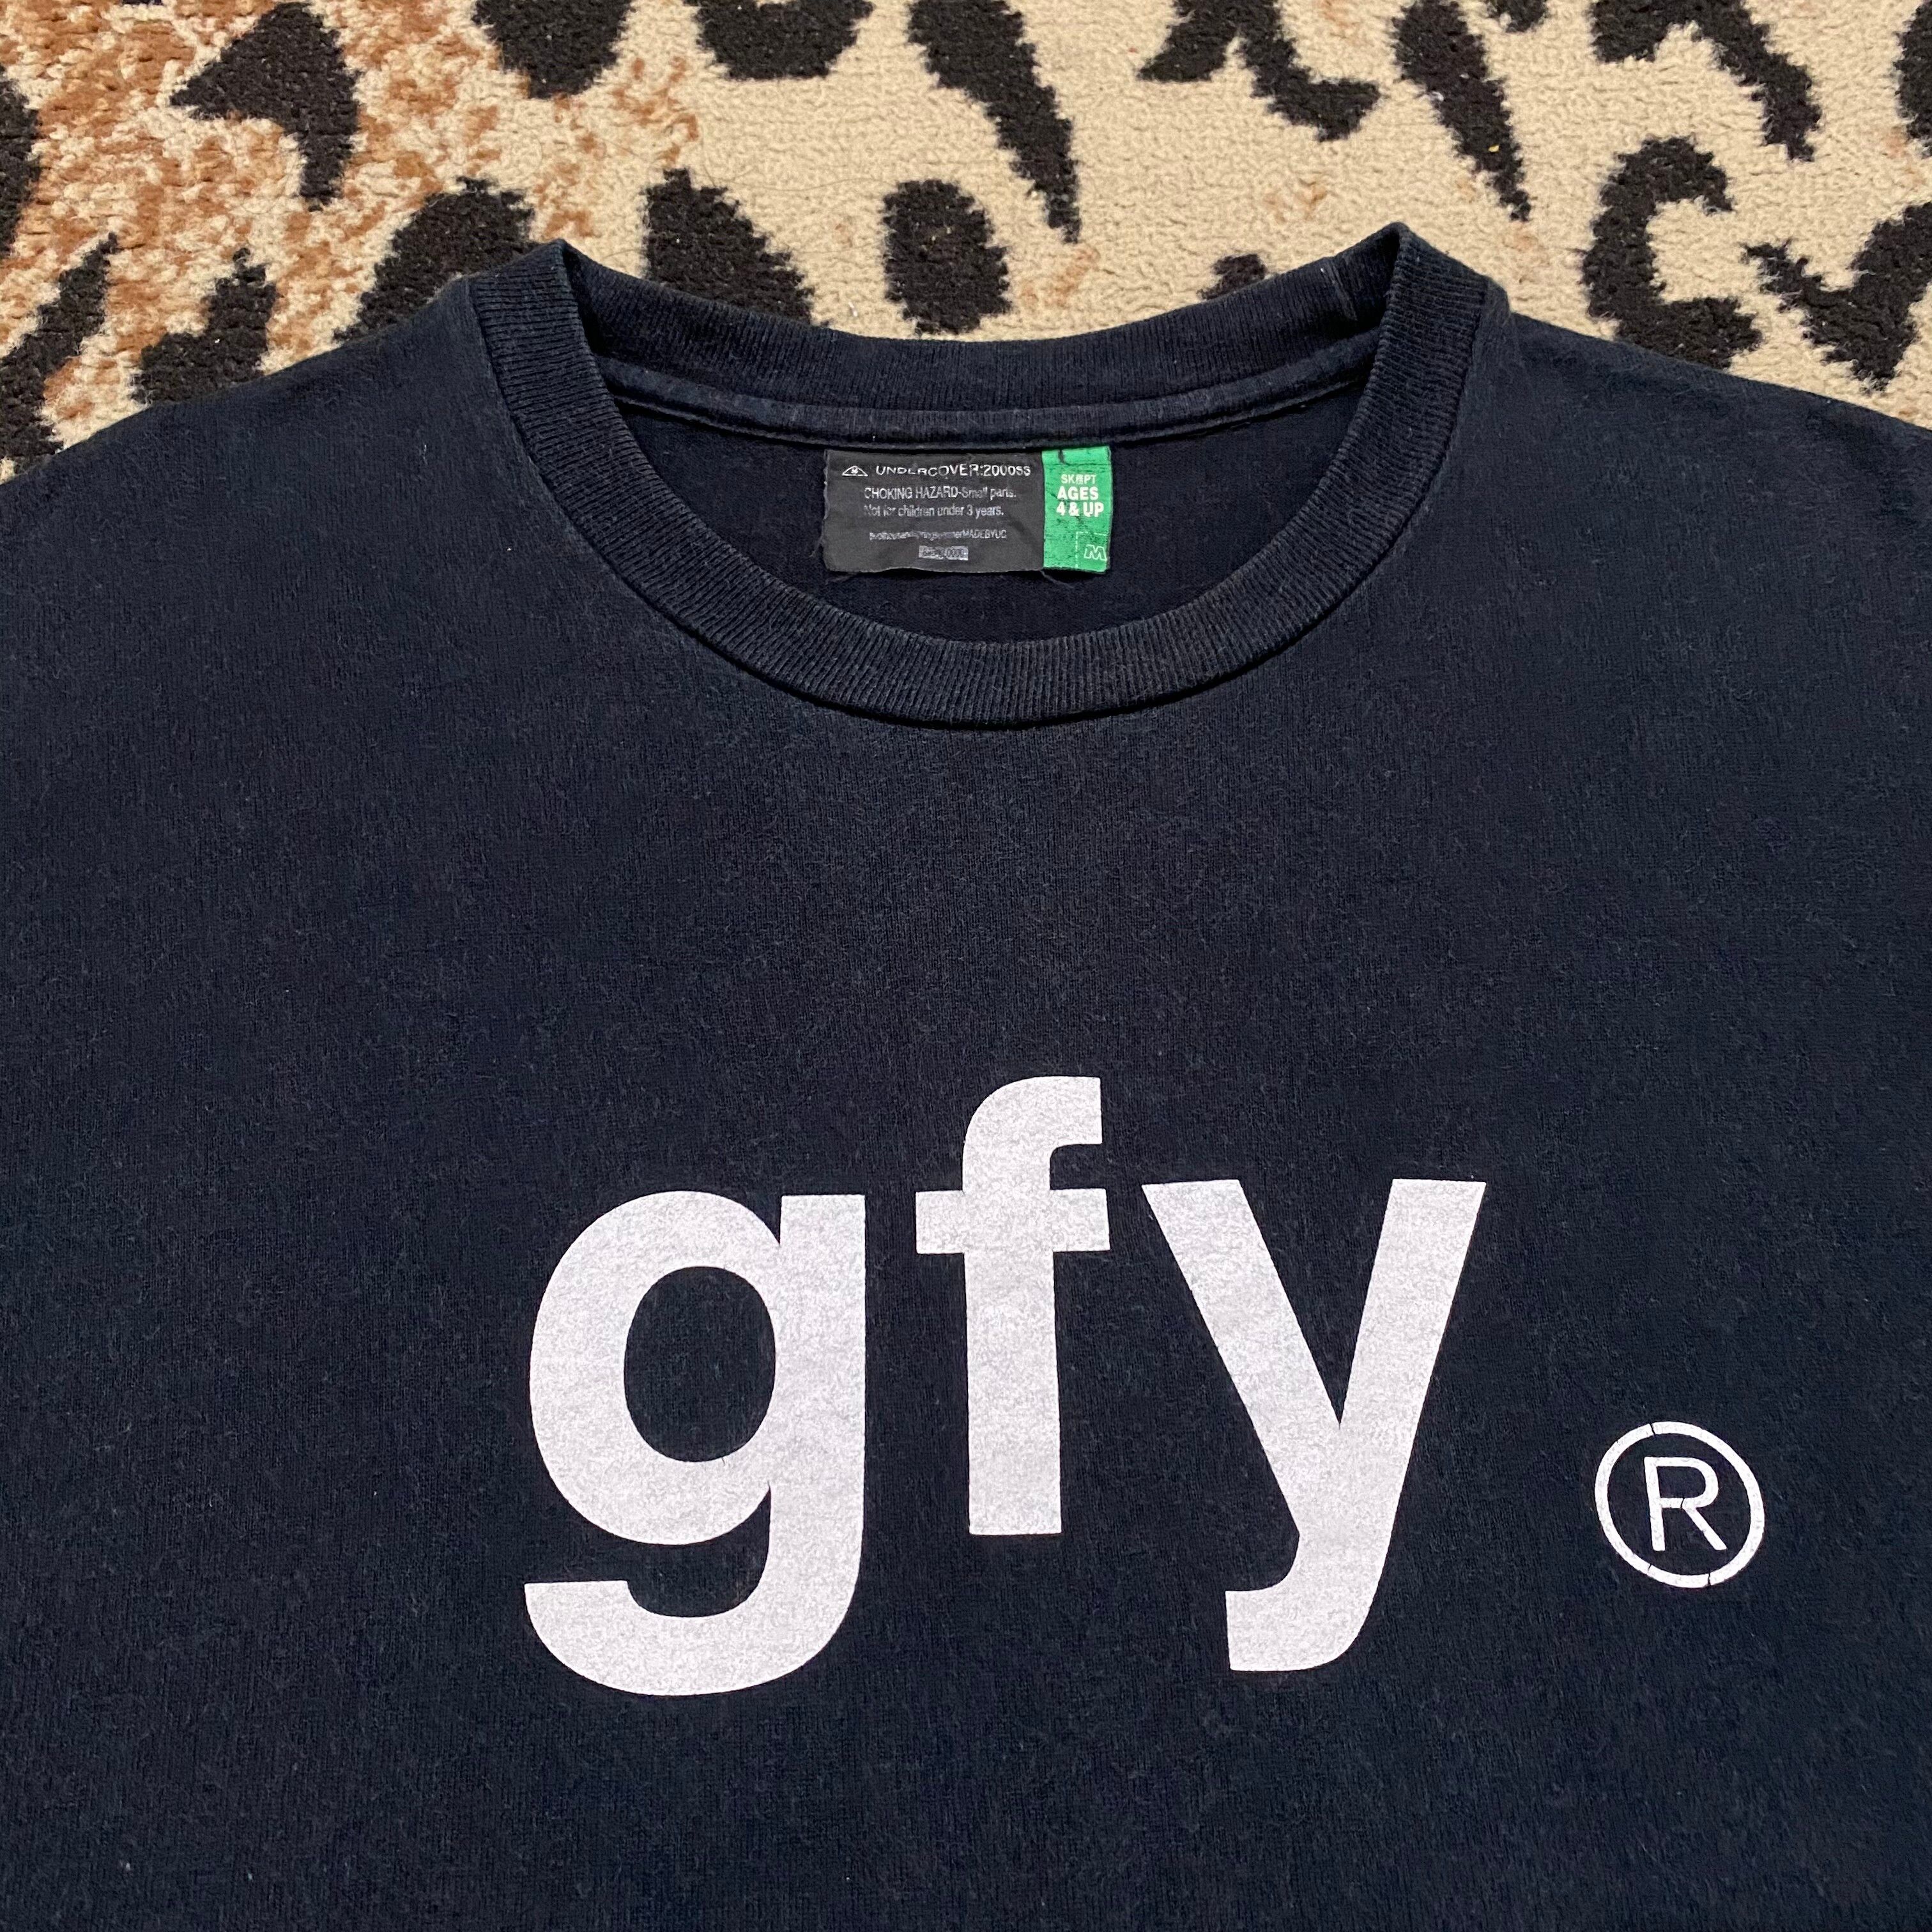 Undercover Undercover x WTAPS SS00 gfy Tee | Grailed